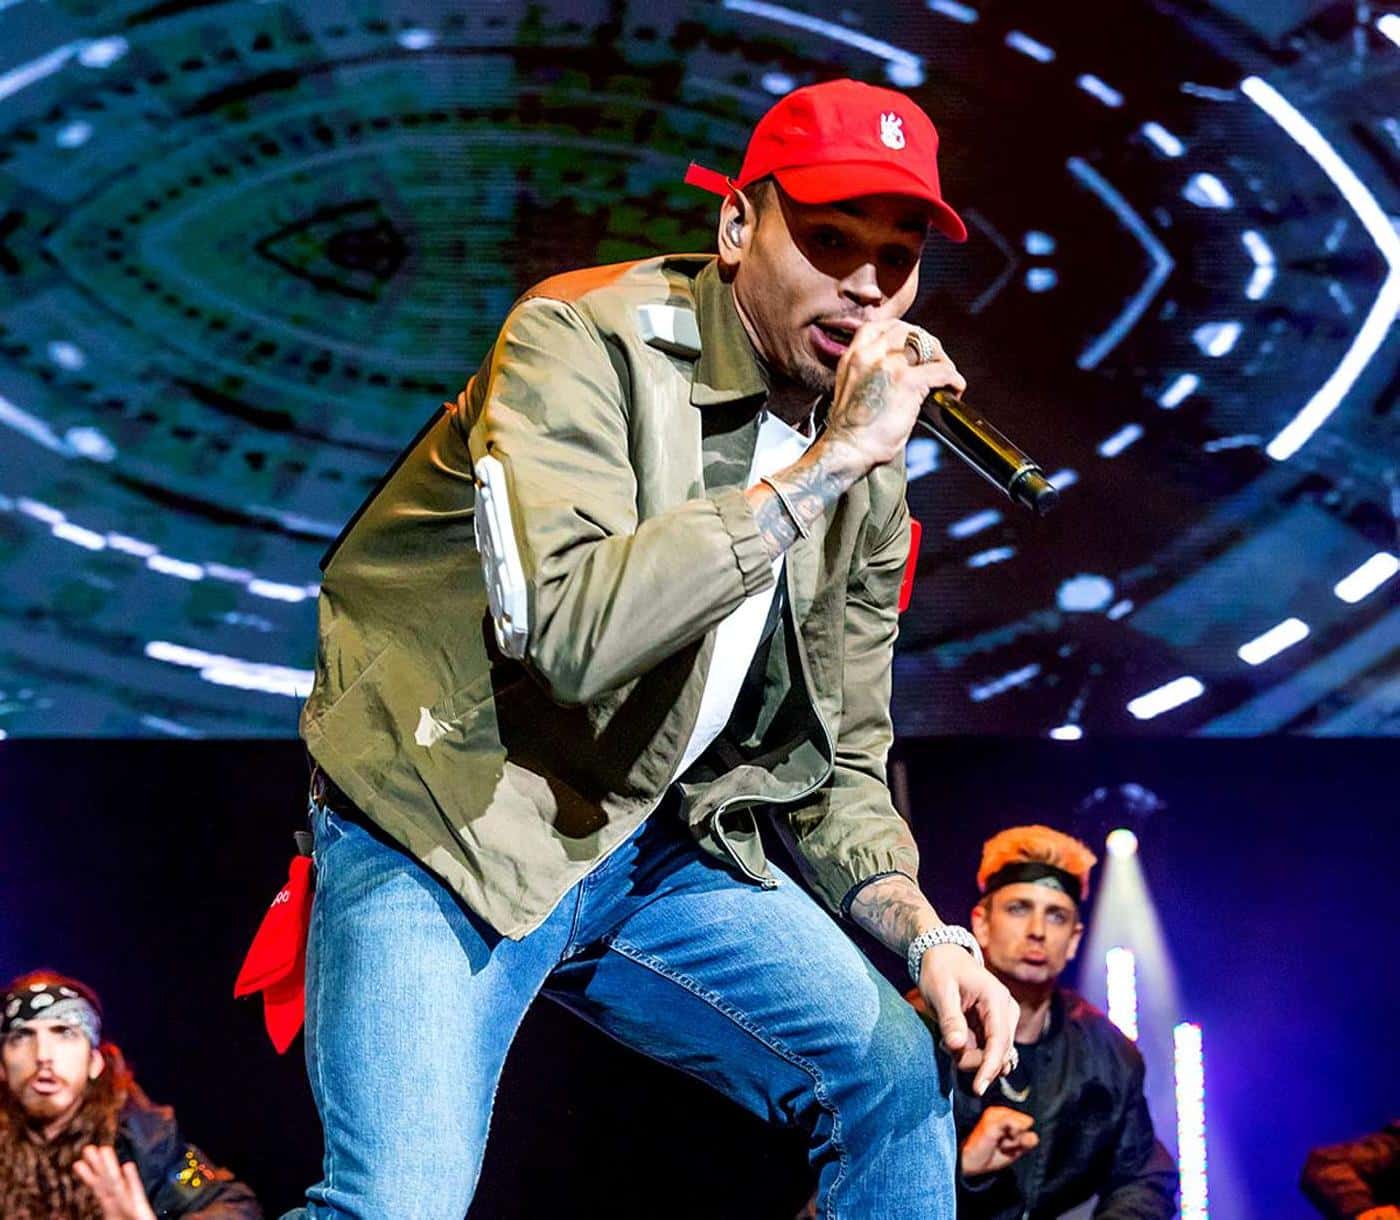 Chris Brown Announces 'Indigoat' Tour with Tory Lanez, Ty Dolla ign